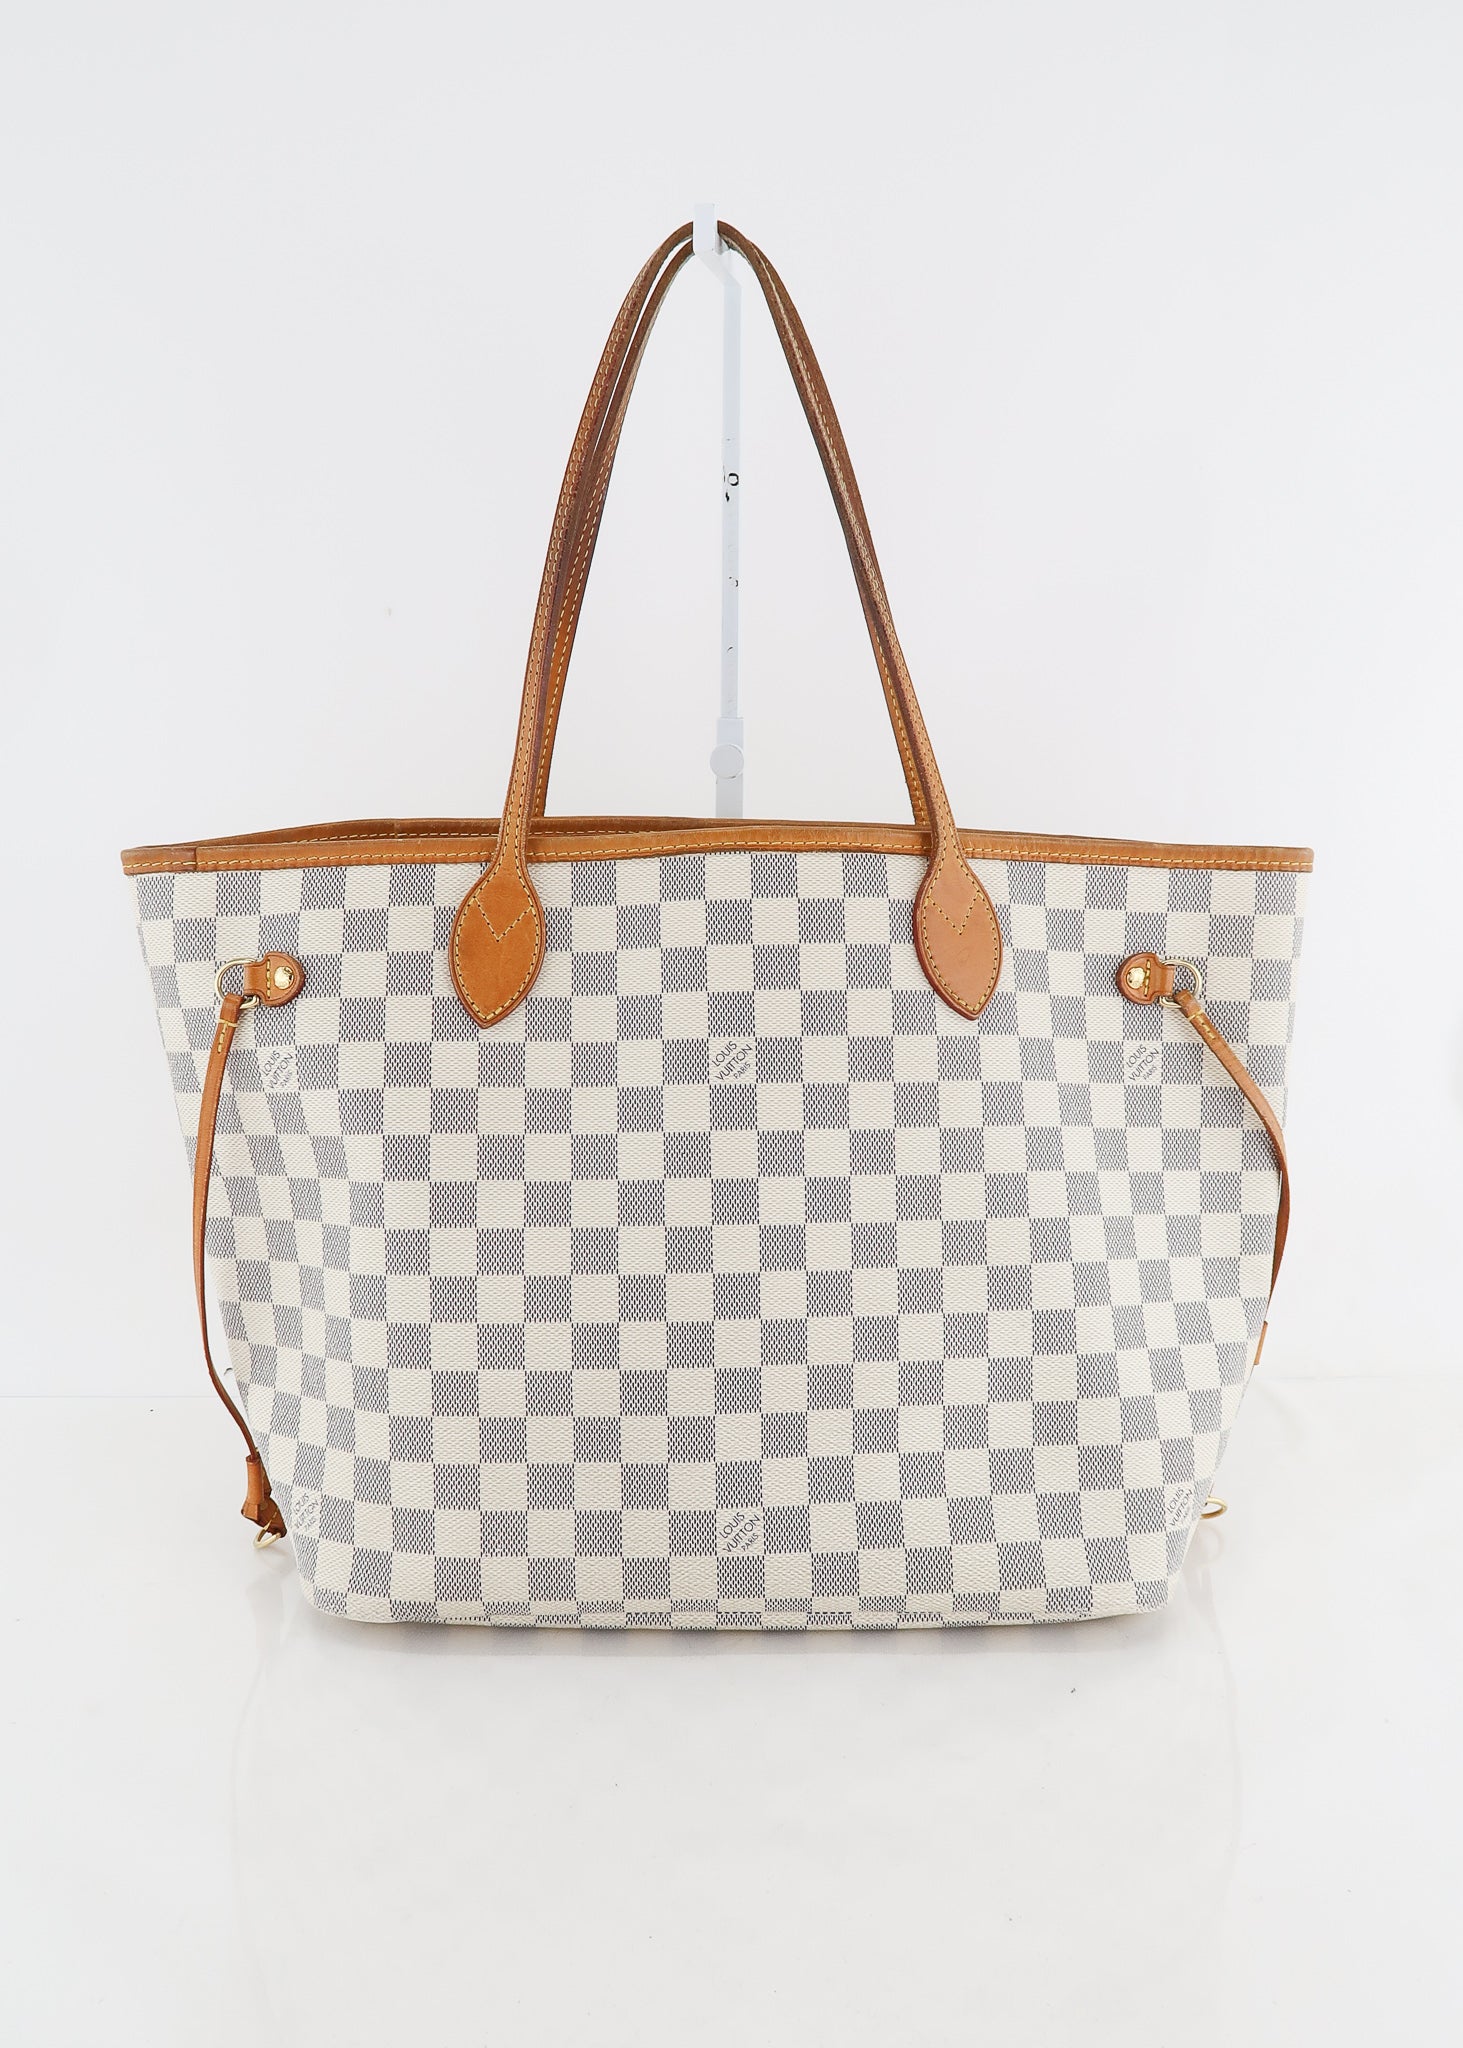 LV Damier Azur Noe- in a darker patina (picts from TPF)